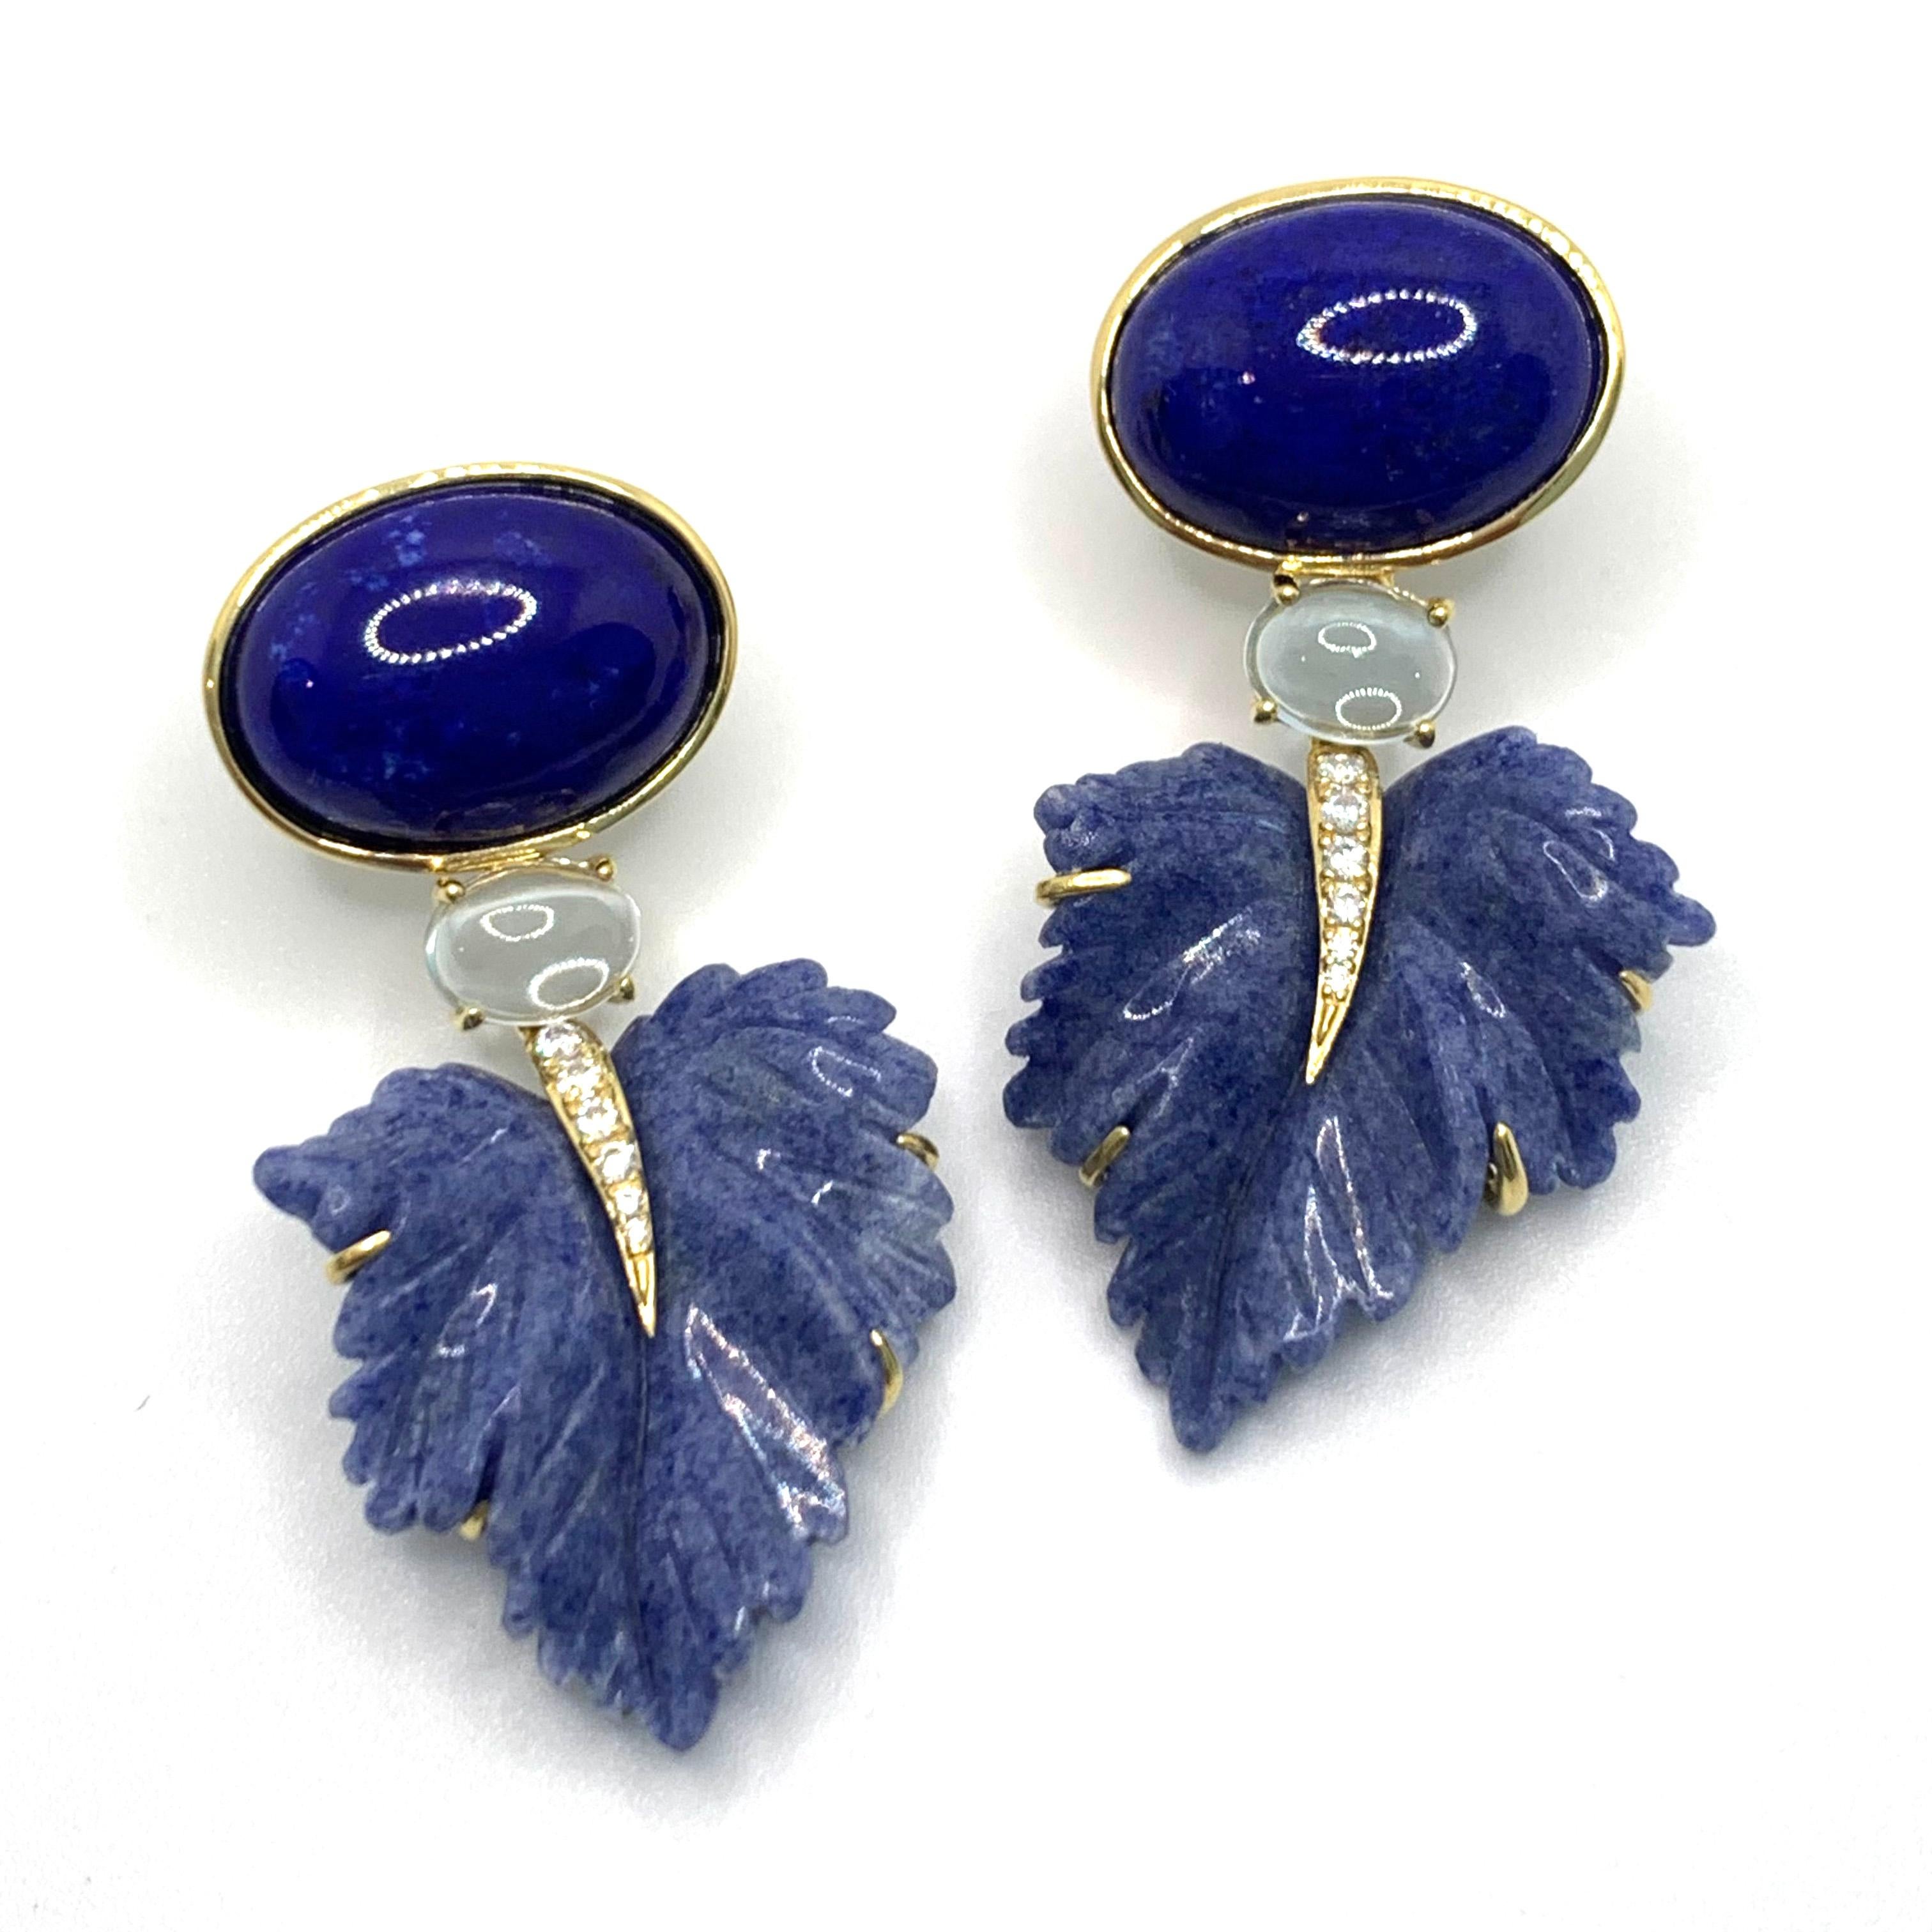 Mixed Cut Stunning Cabochon Lapis Lazuli and Carved Blue Dumortierite Leaf Drop Earrings